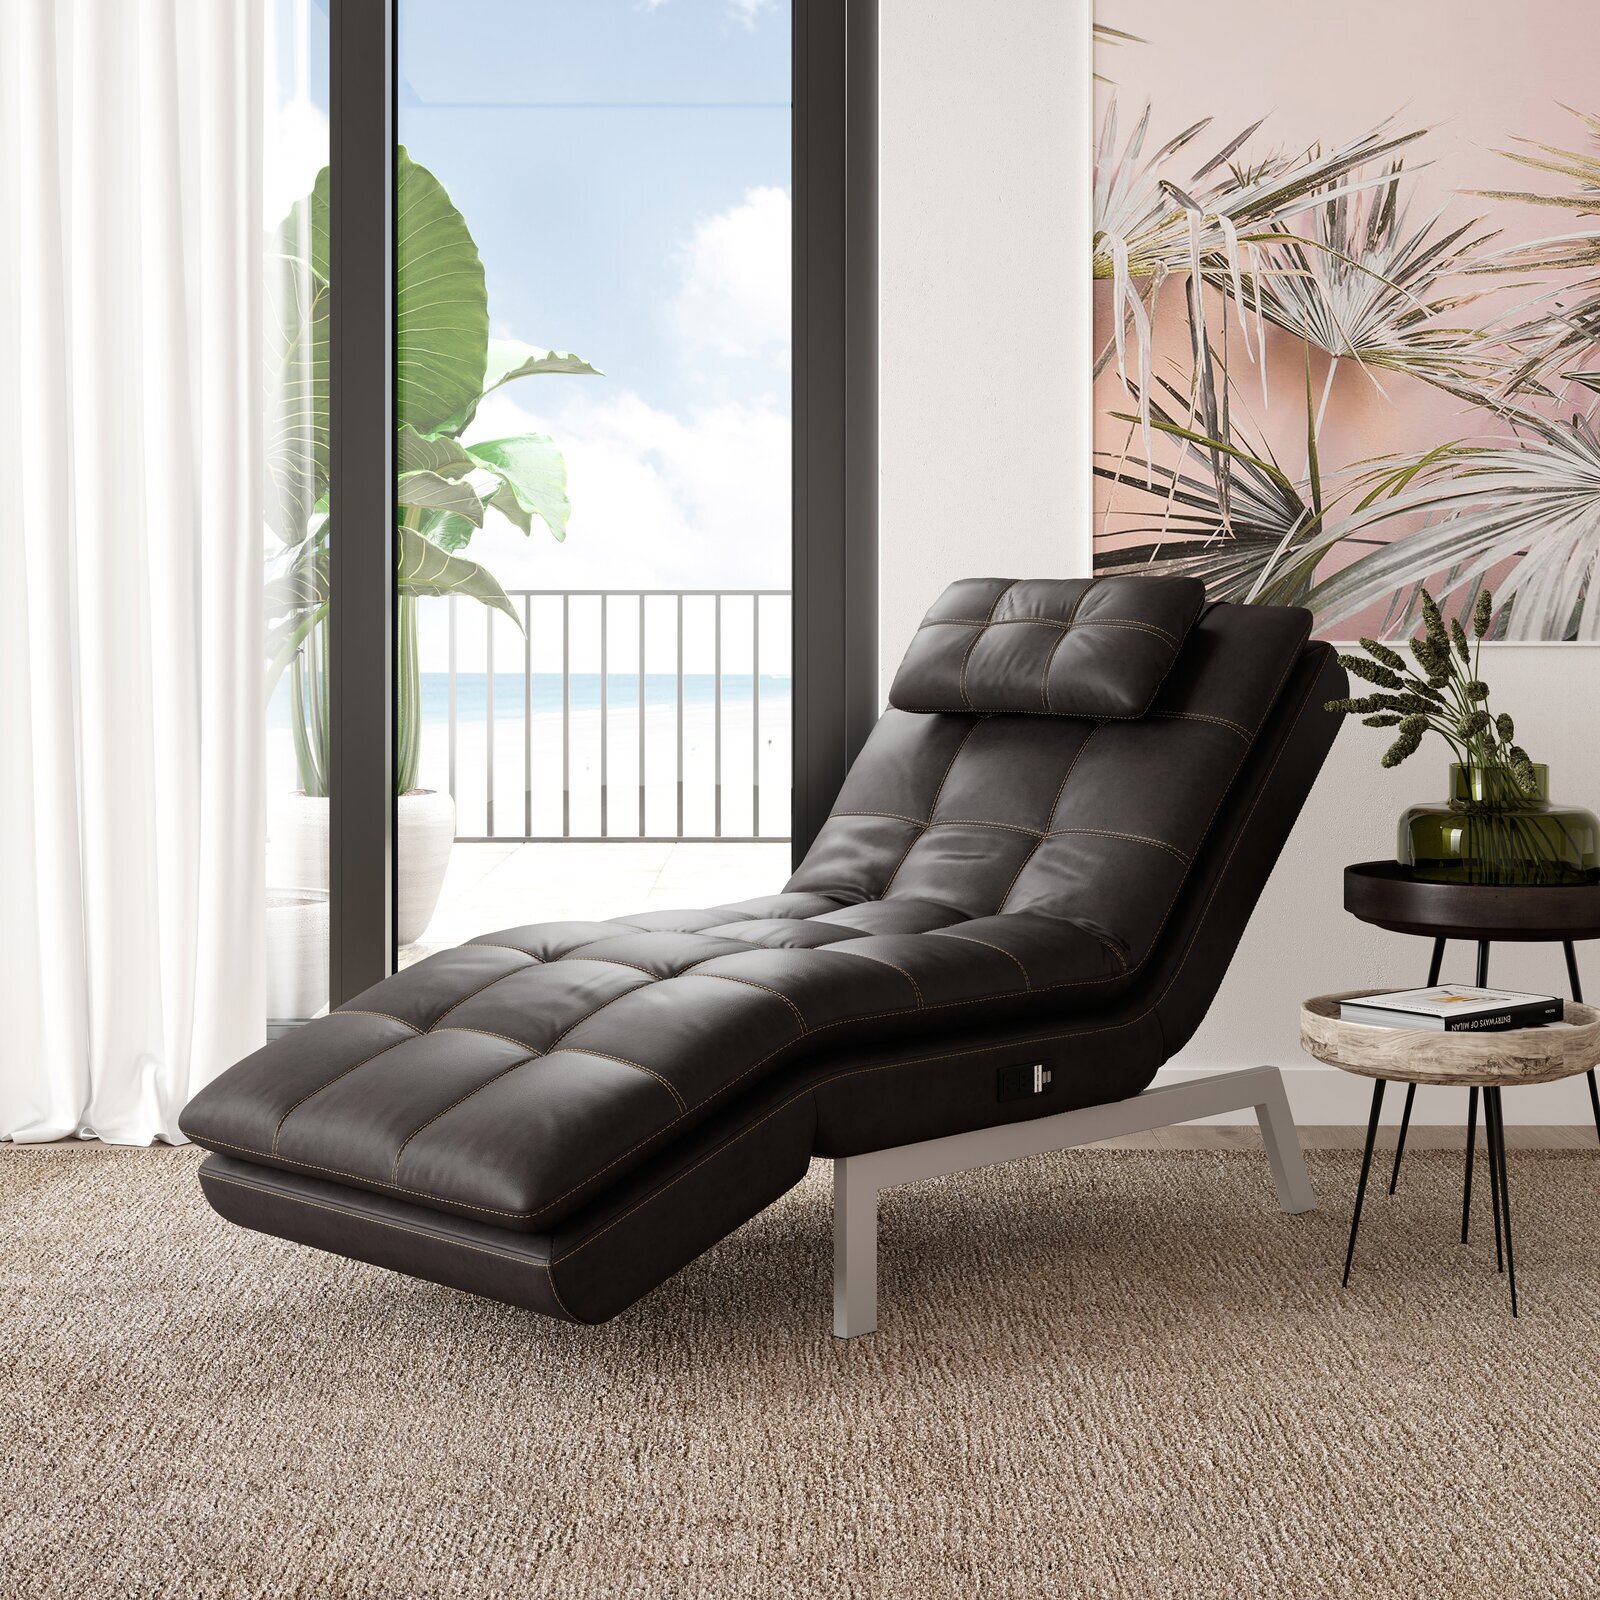 Tufted leather chaise